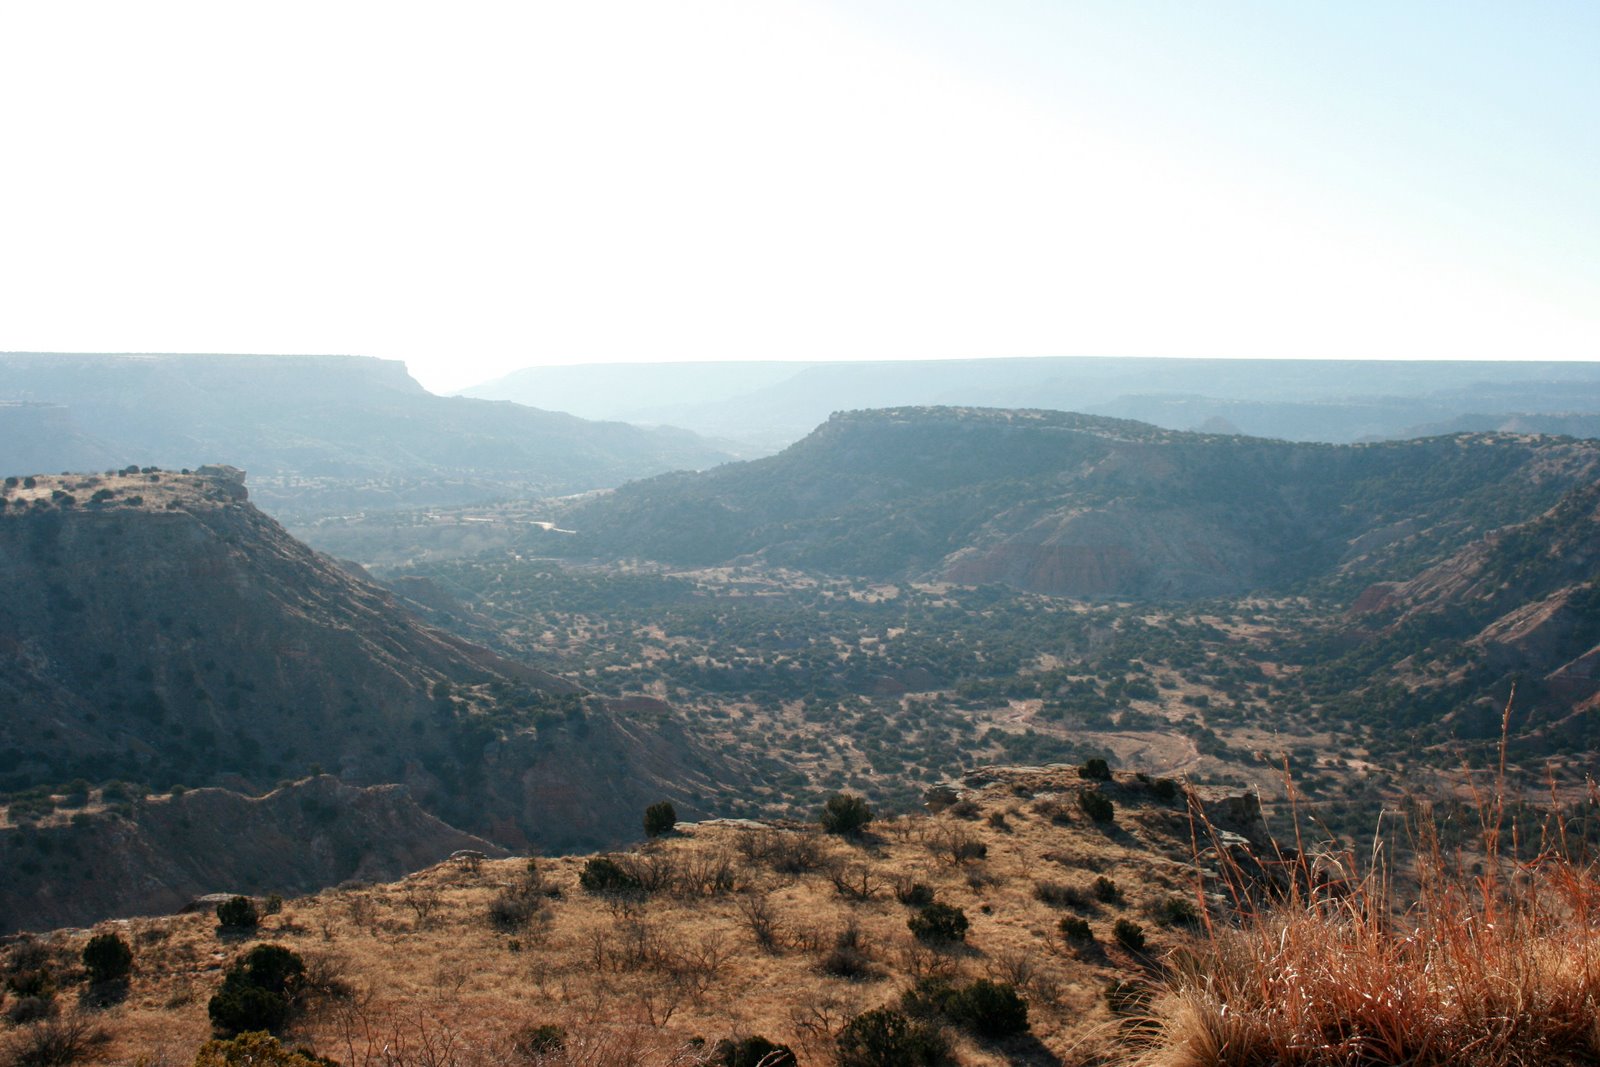 [View+of+Palo+Duro+Canyon+from+Visitors+Center.jpg]